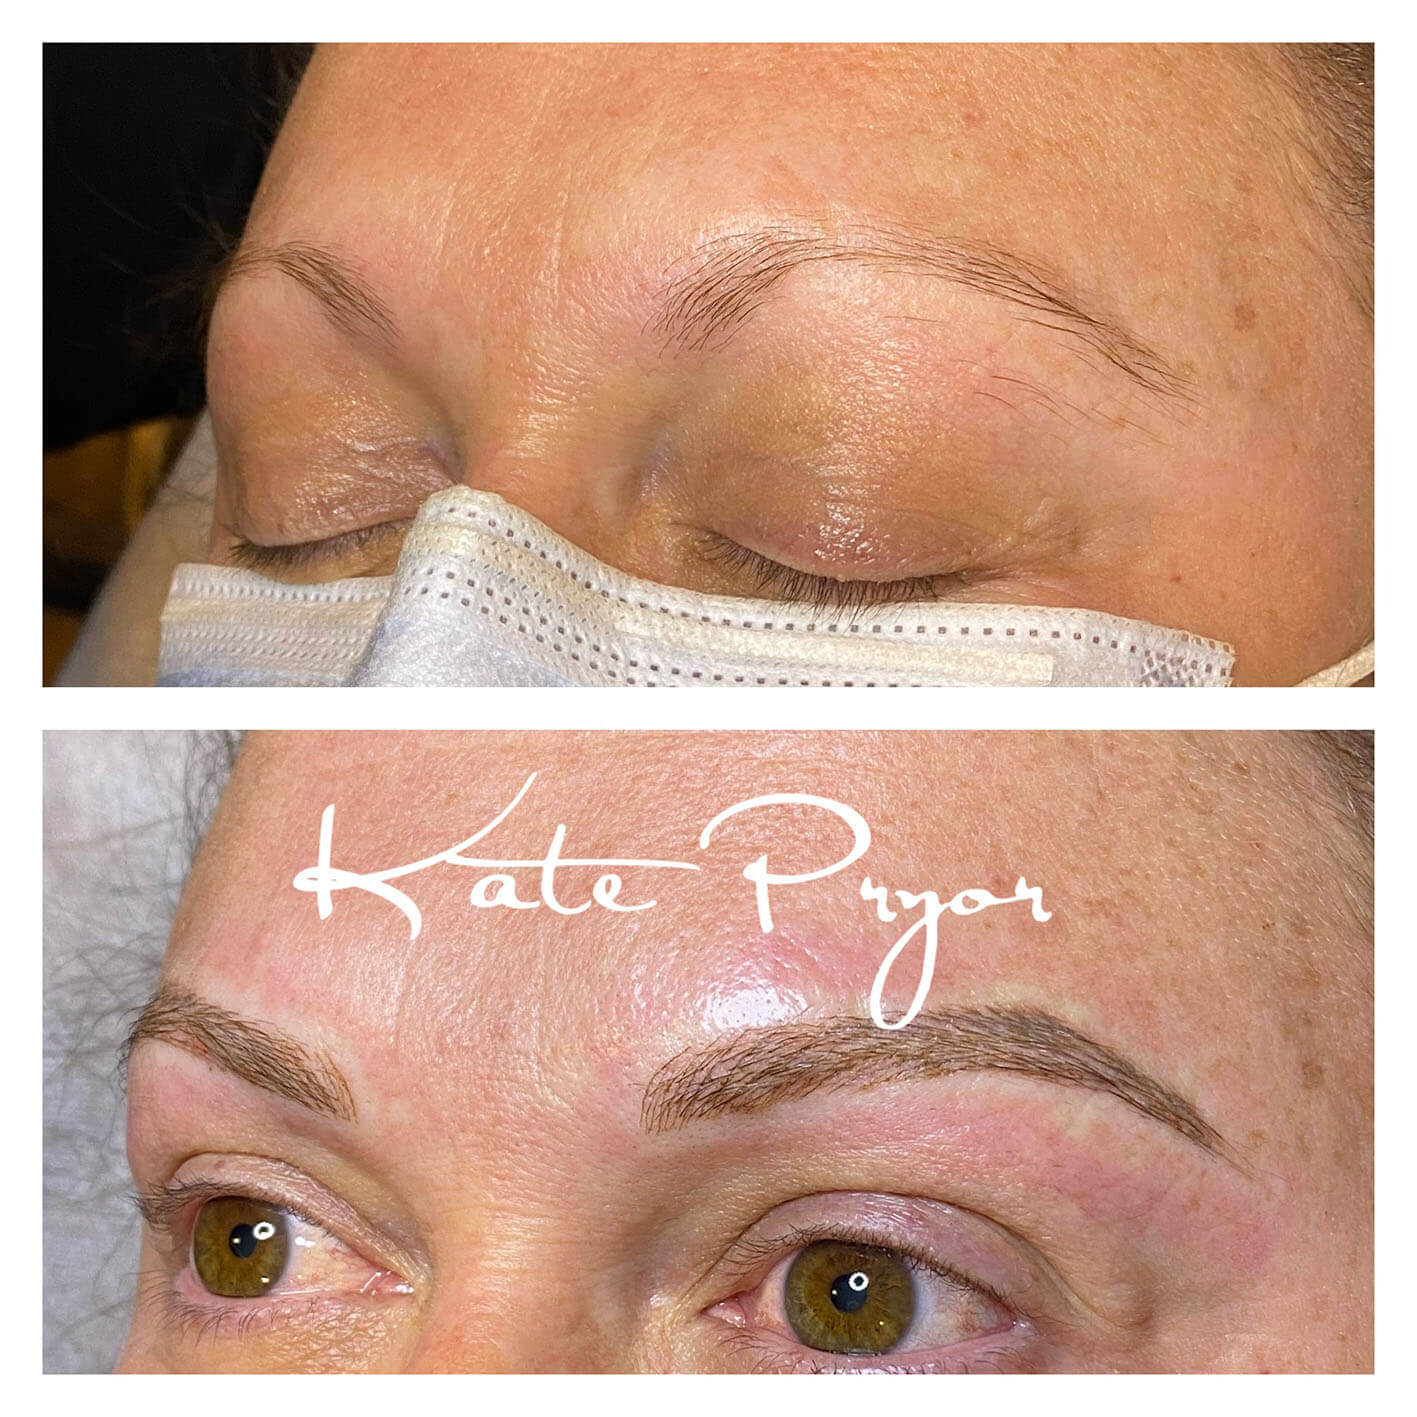 Elite-Skin-Cosmetic-Tattooing-Kate-Pryor-Before-After-13